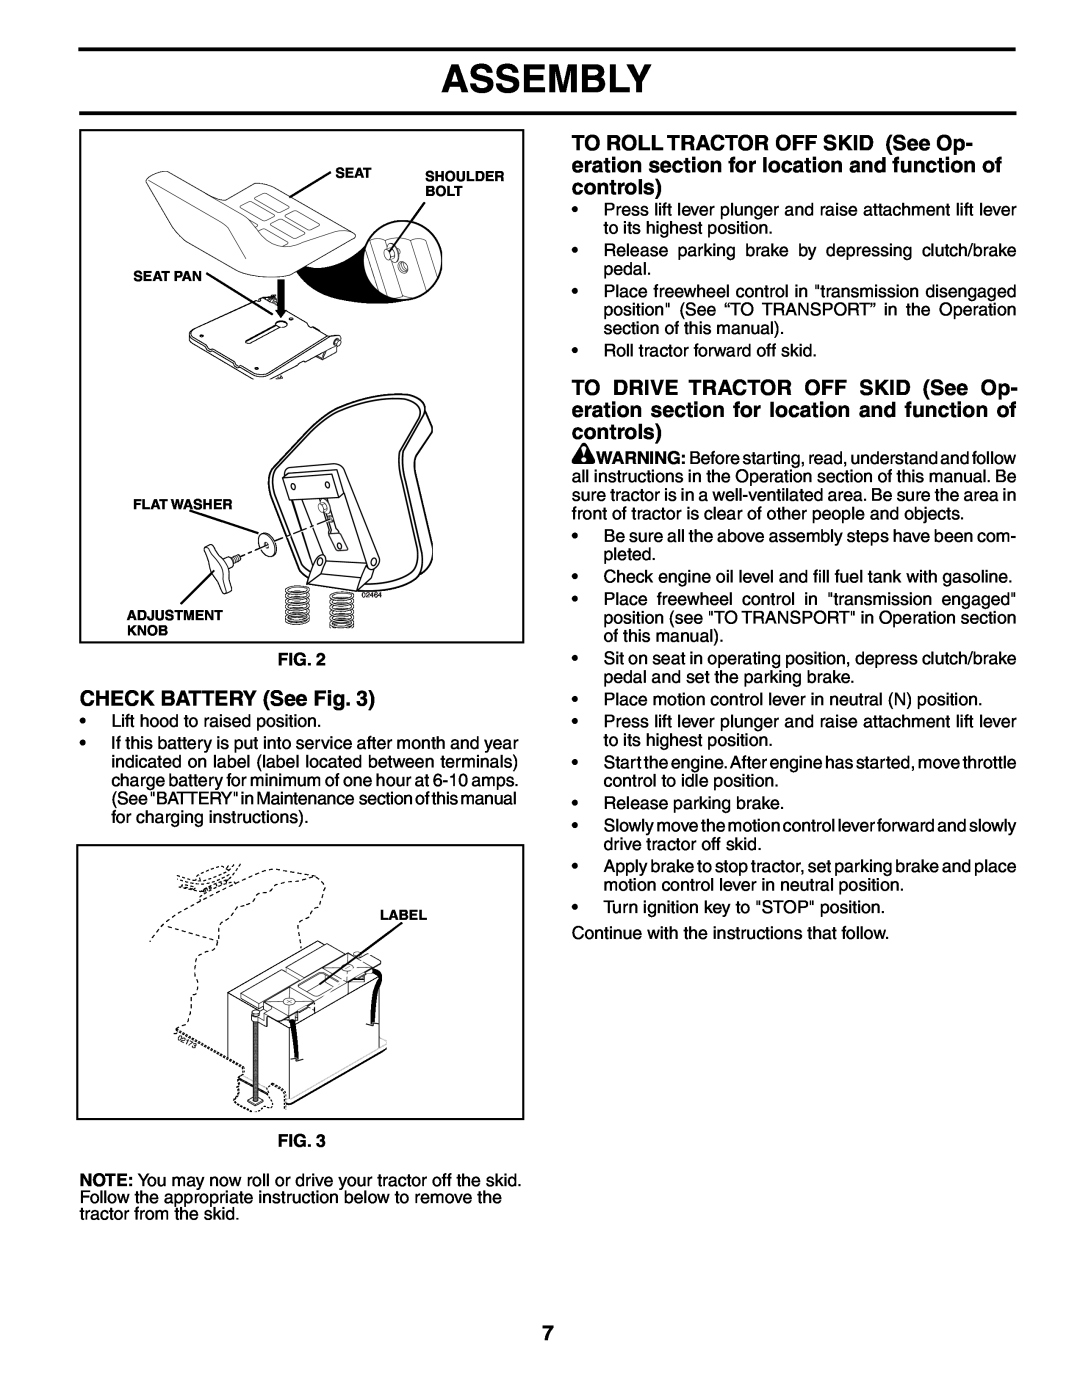 Poulan 195032 manual CHECK BATTERY See Fig, Assembly 